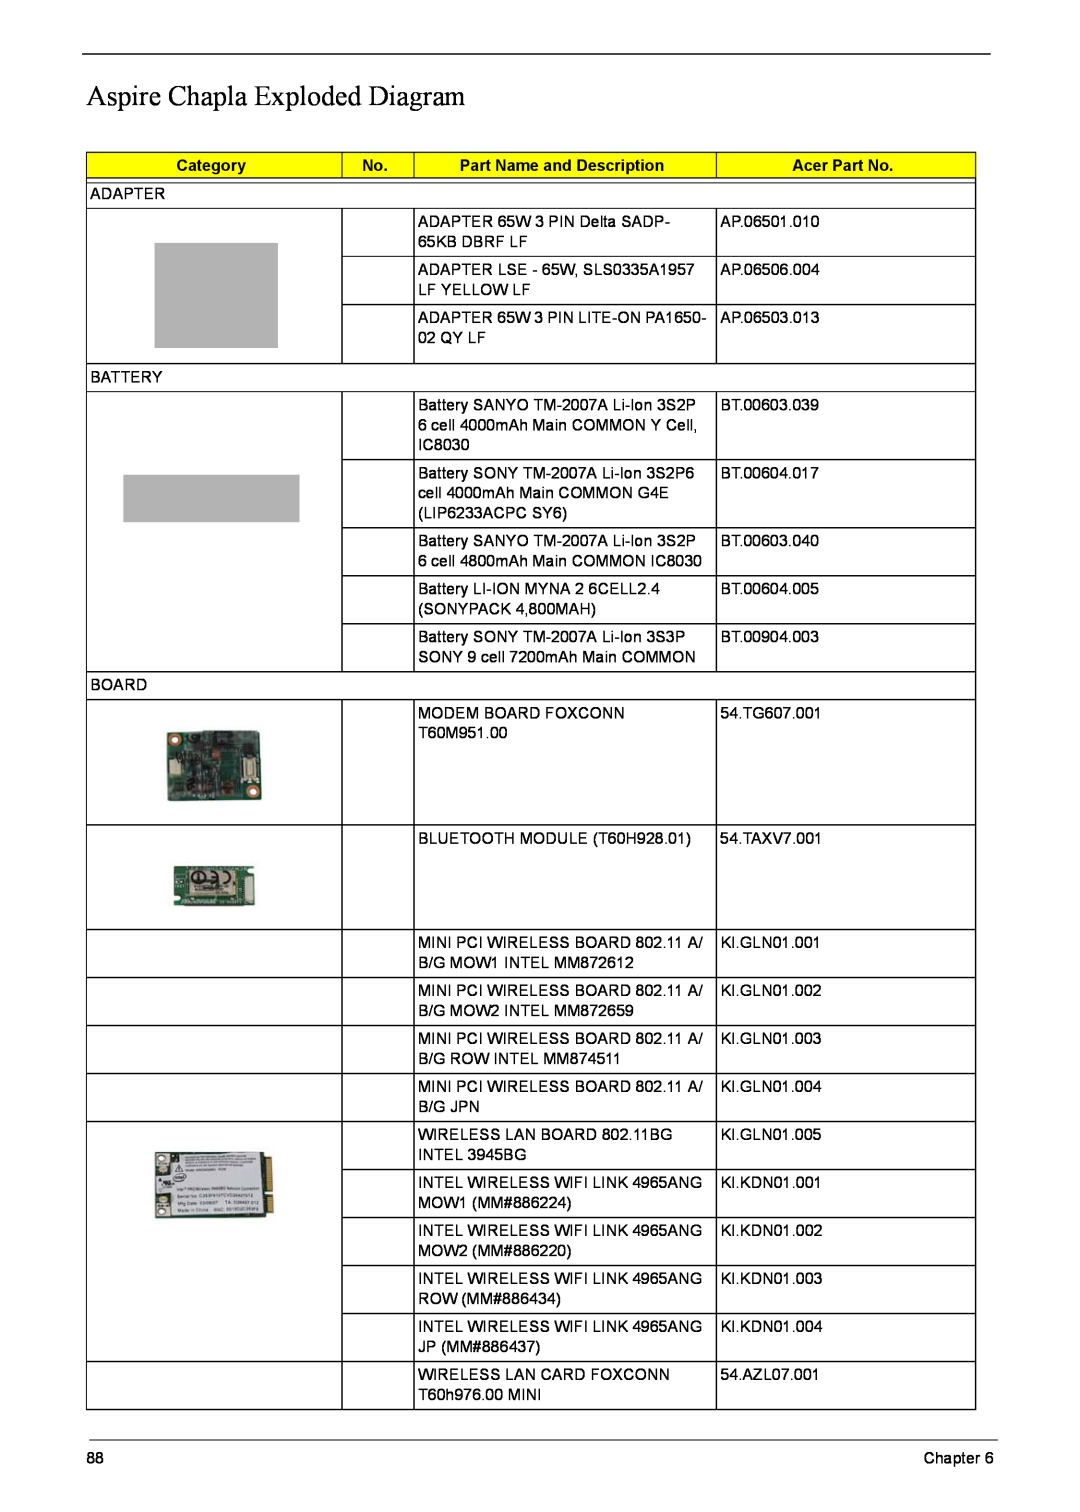 Acer 5920G Series manual Aspire Chapla Exploded Diagram, Category, Part Name and Description, Acer Part No 